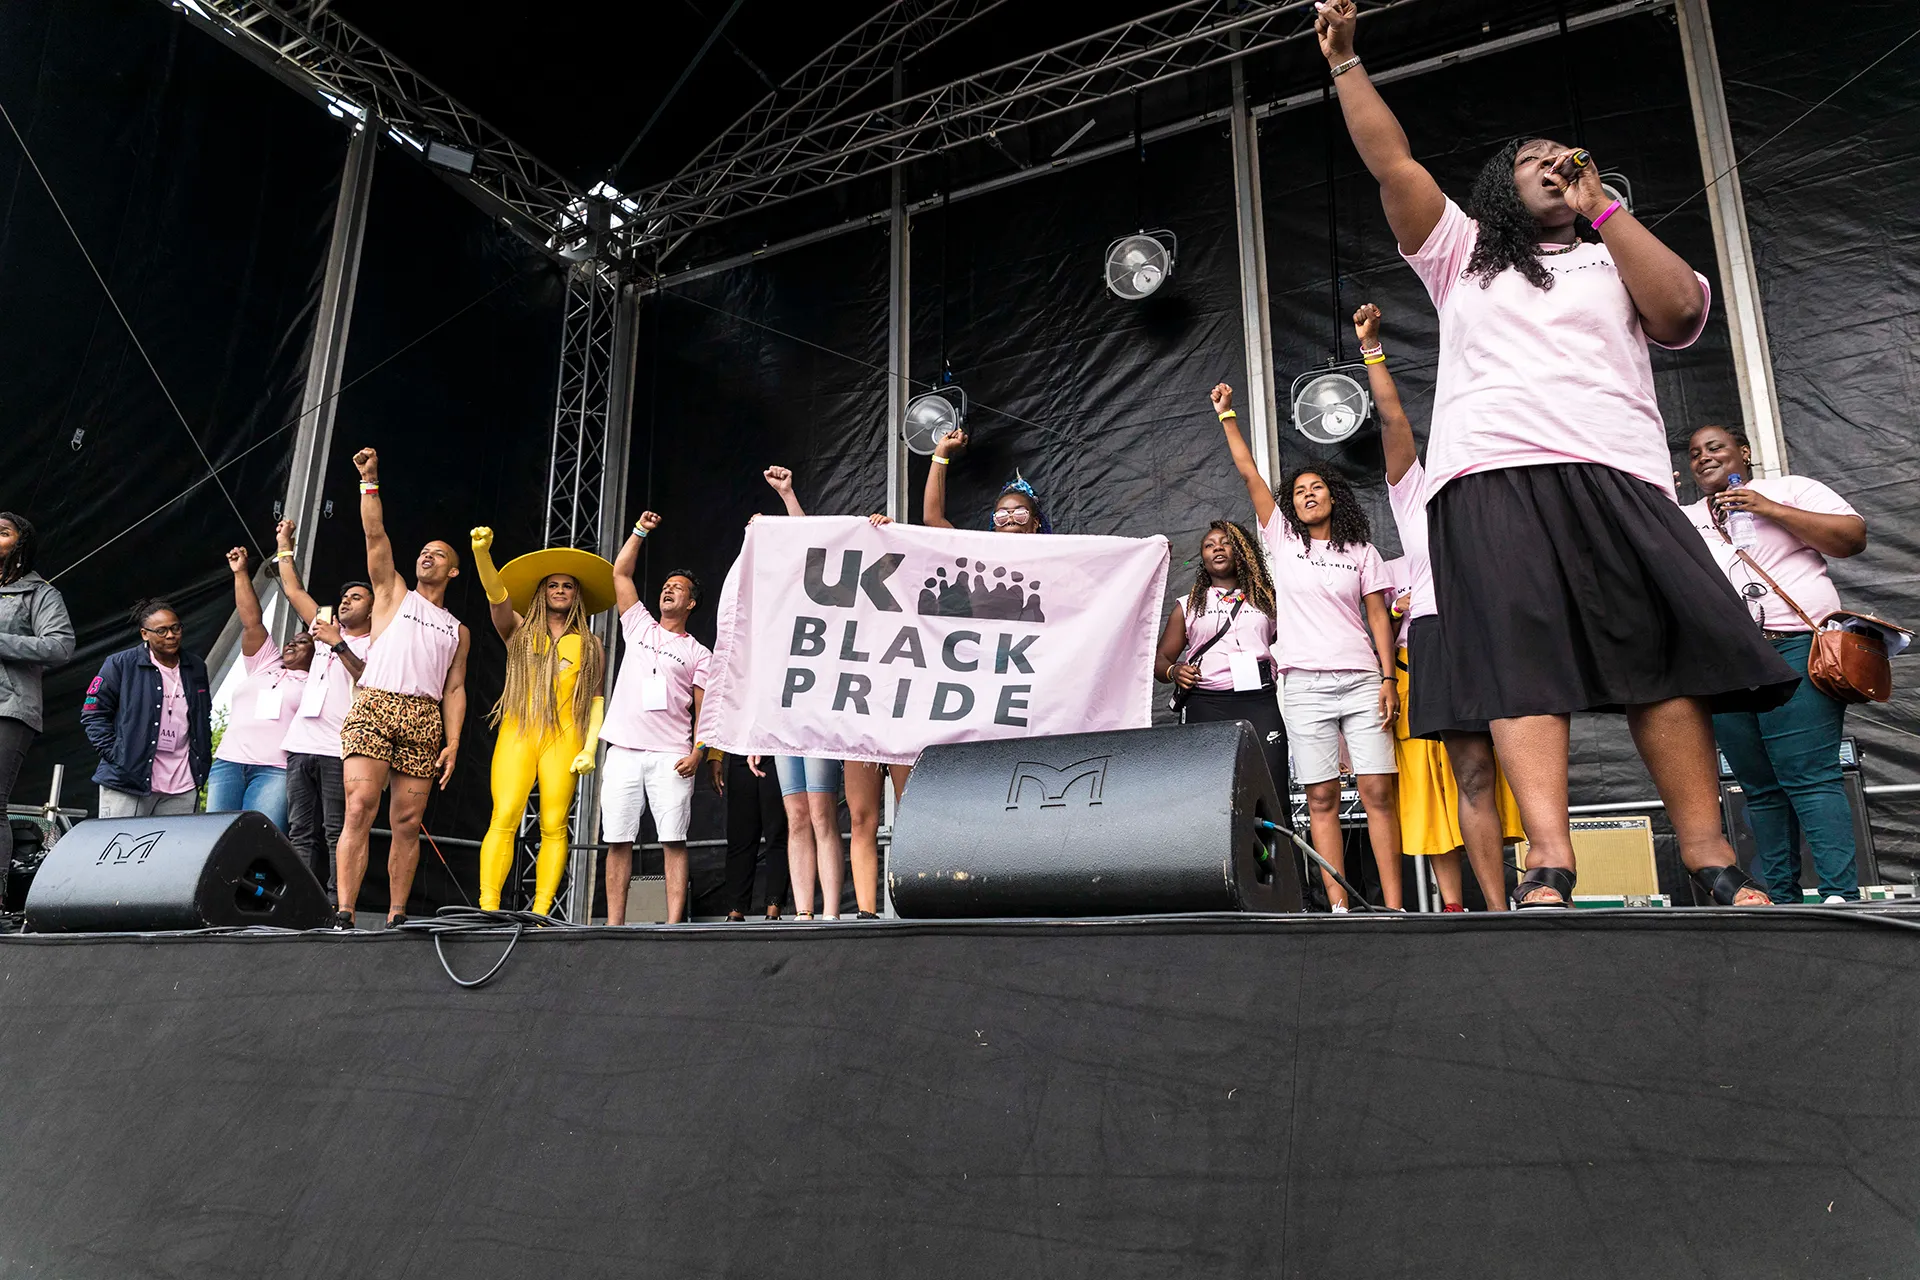 Pride month is upon us and UK Black Pride is making their return to the London streets